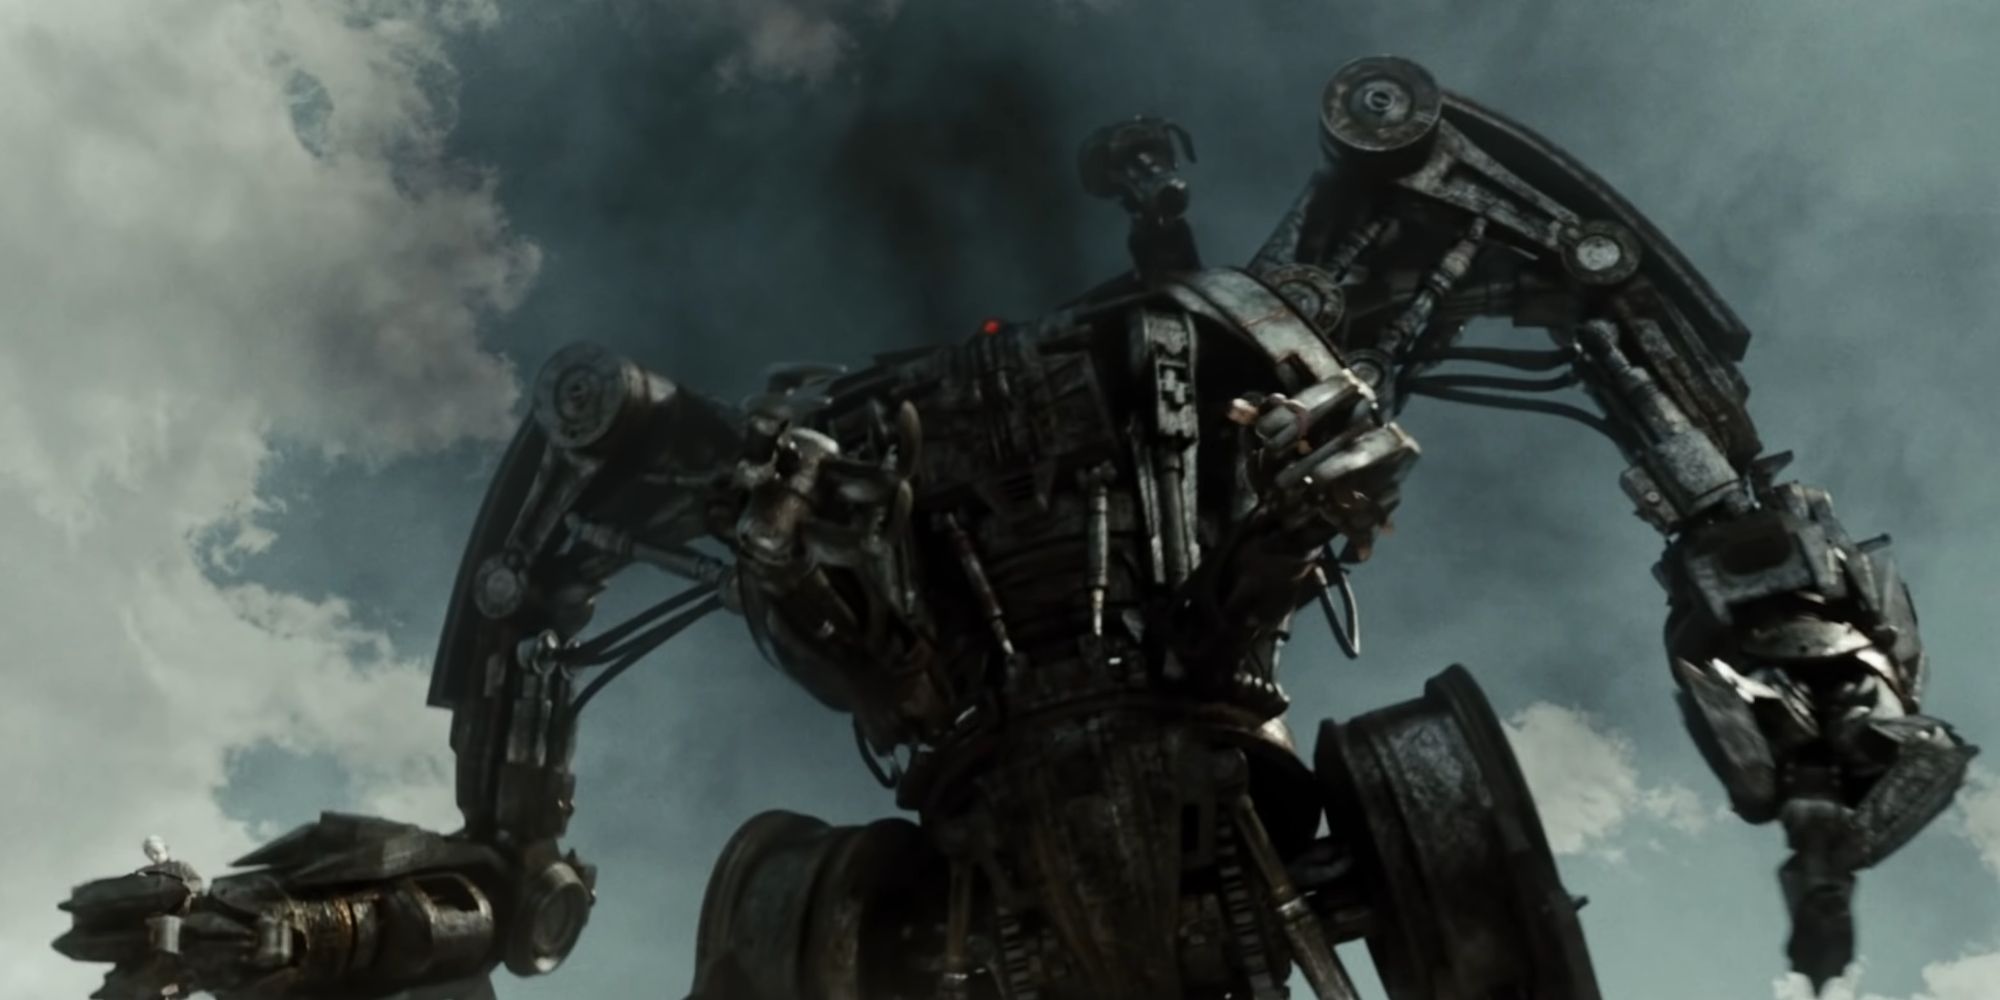 Harvester Terminator gathering humans while aiming shoulder cannon in Terminator Salvation